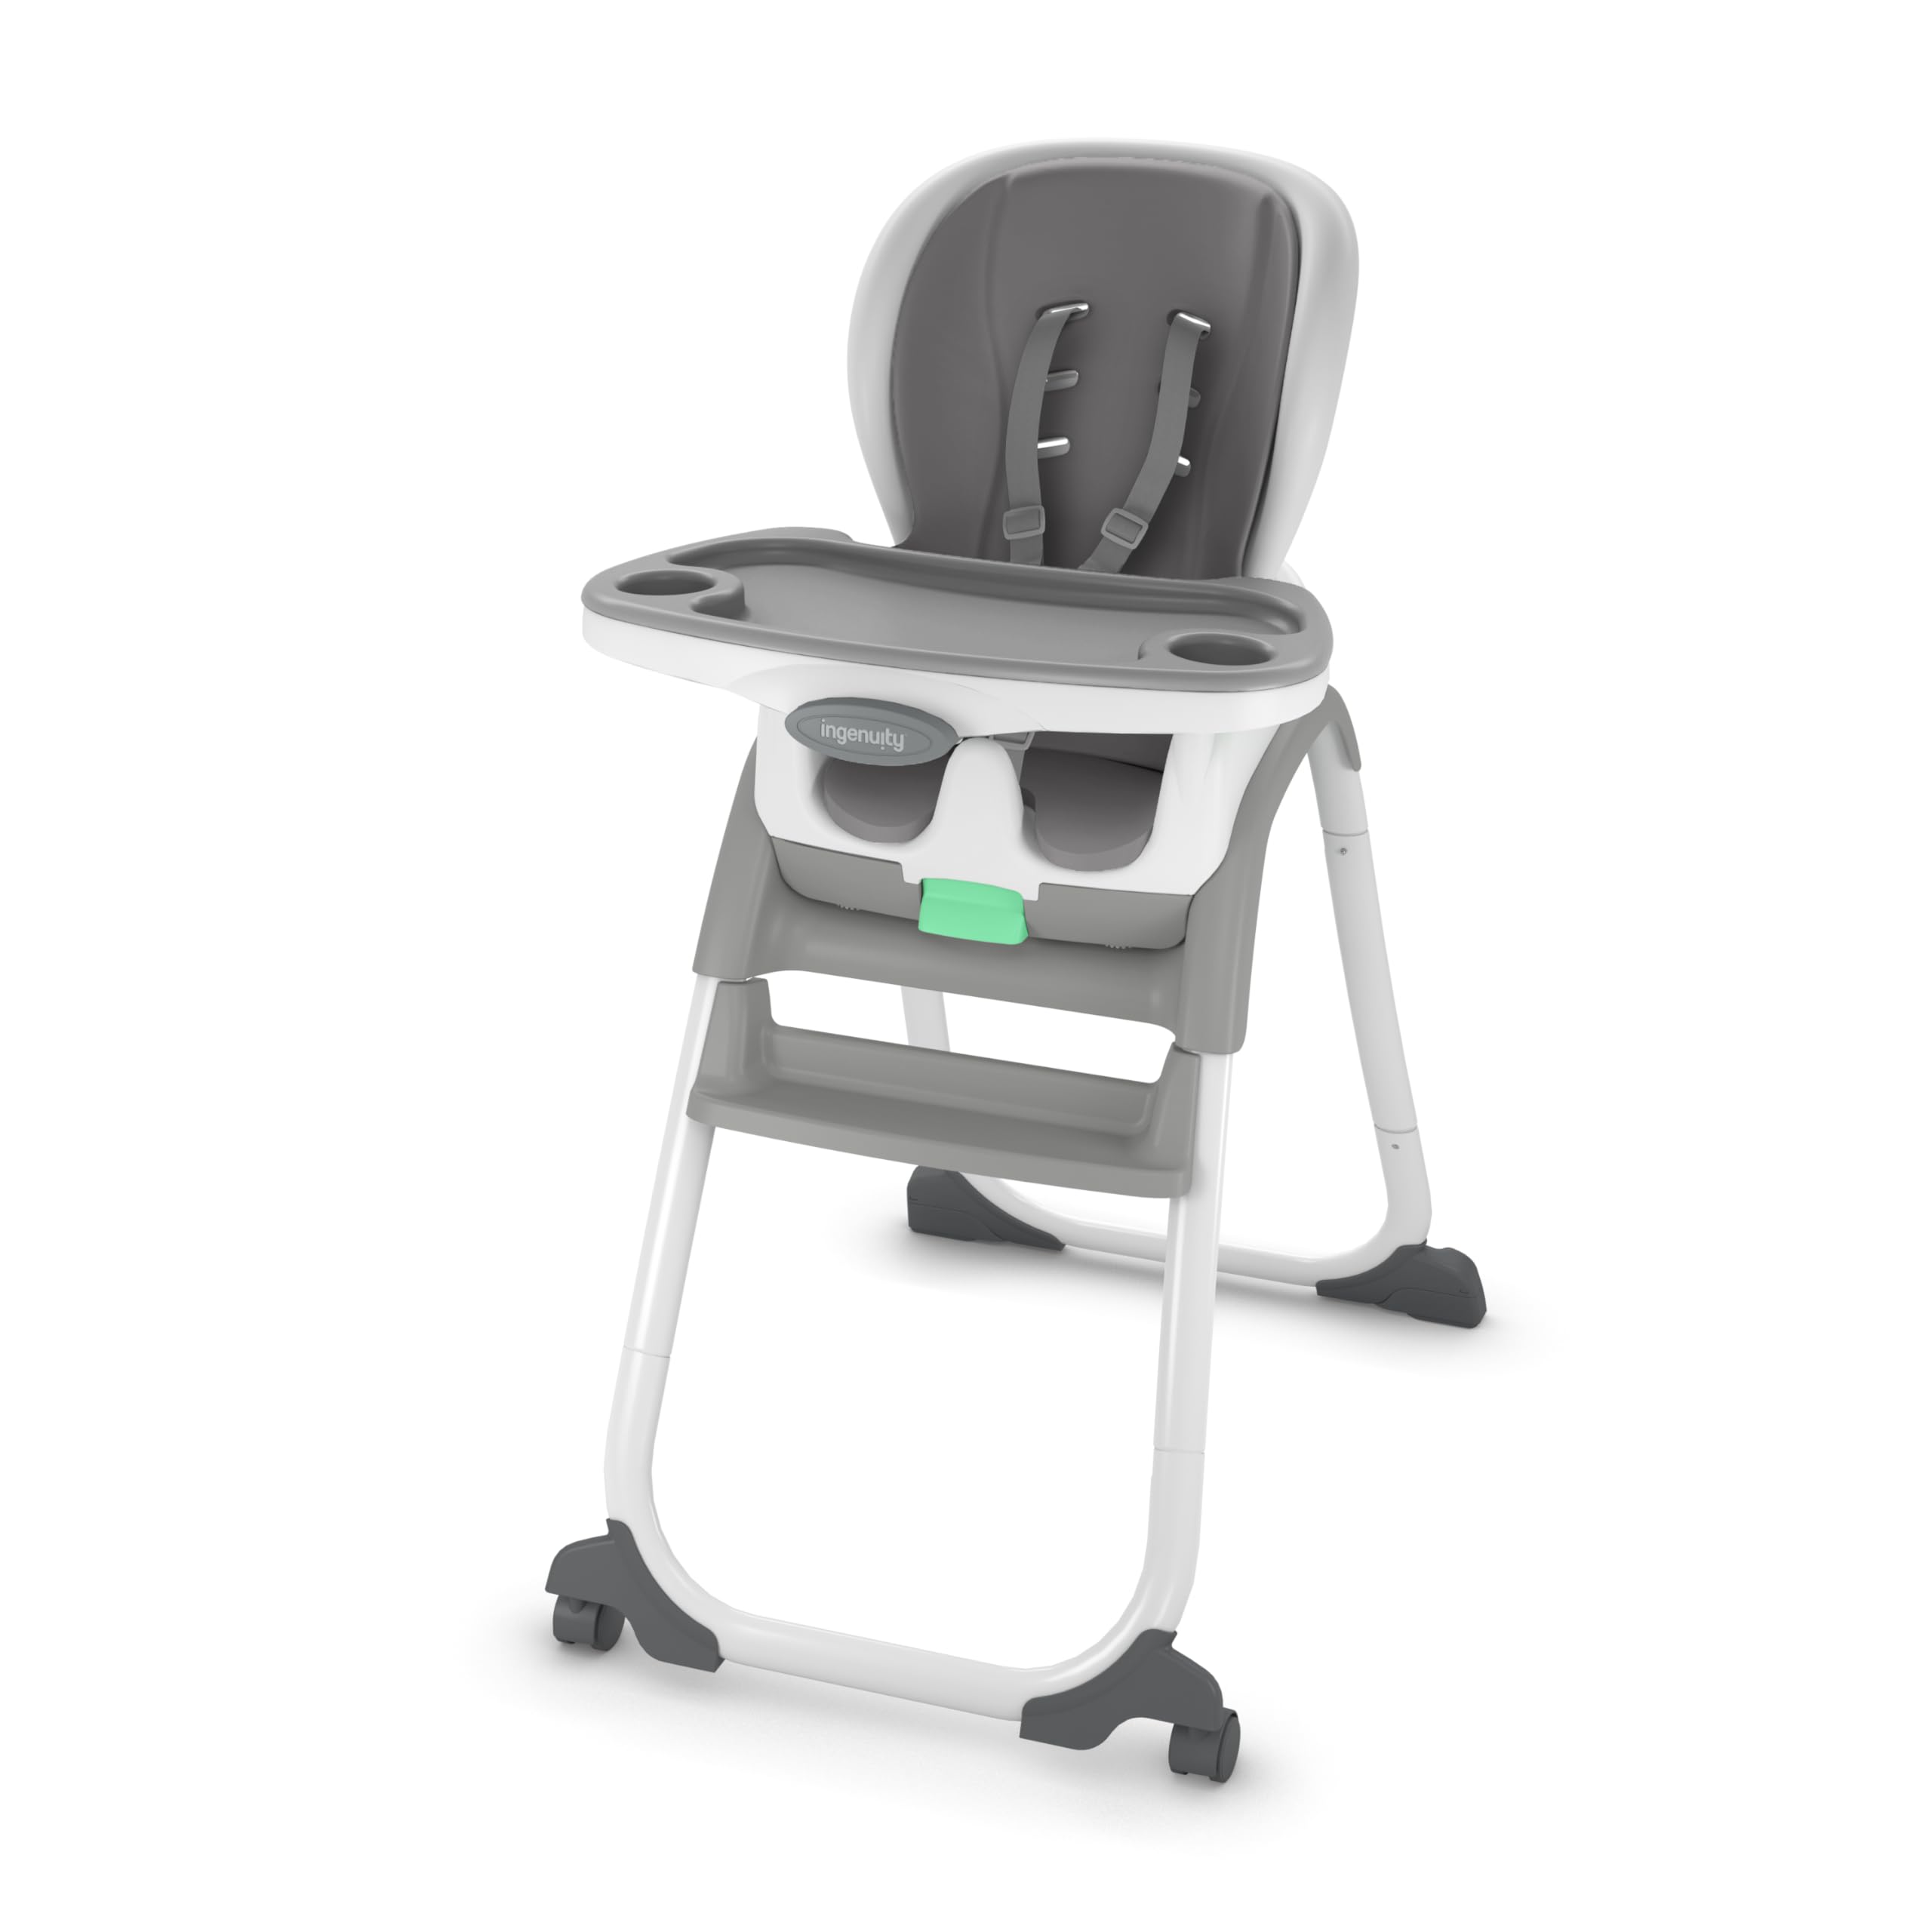 Ingenuity Full Course SmartClean 6-in-1 High Chair – SmartClean EVA Foam, 5 Point Safety Harness, 2 Dishwasher Safe Trays – Slate $69.99